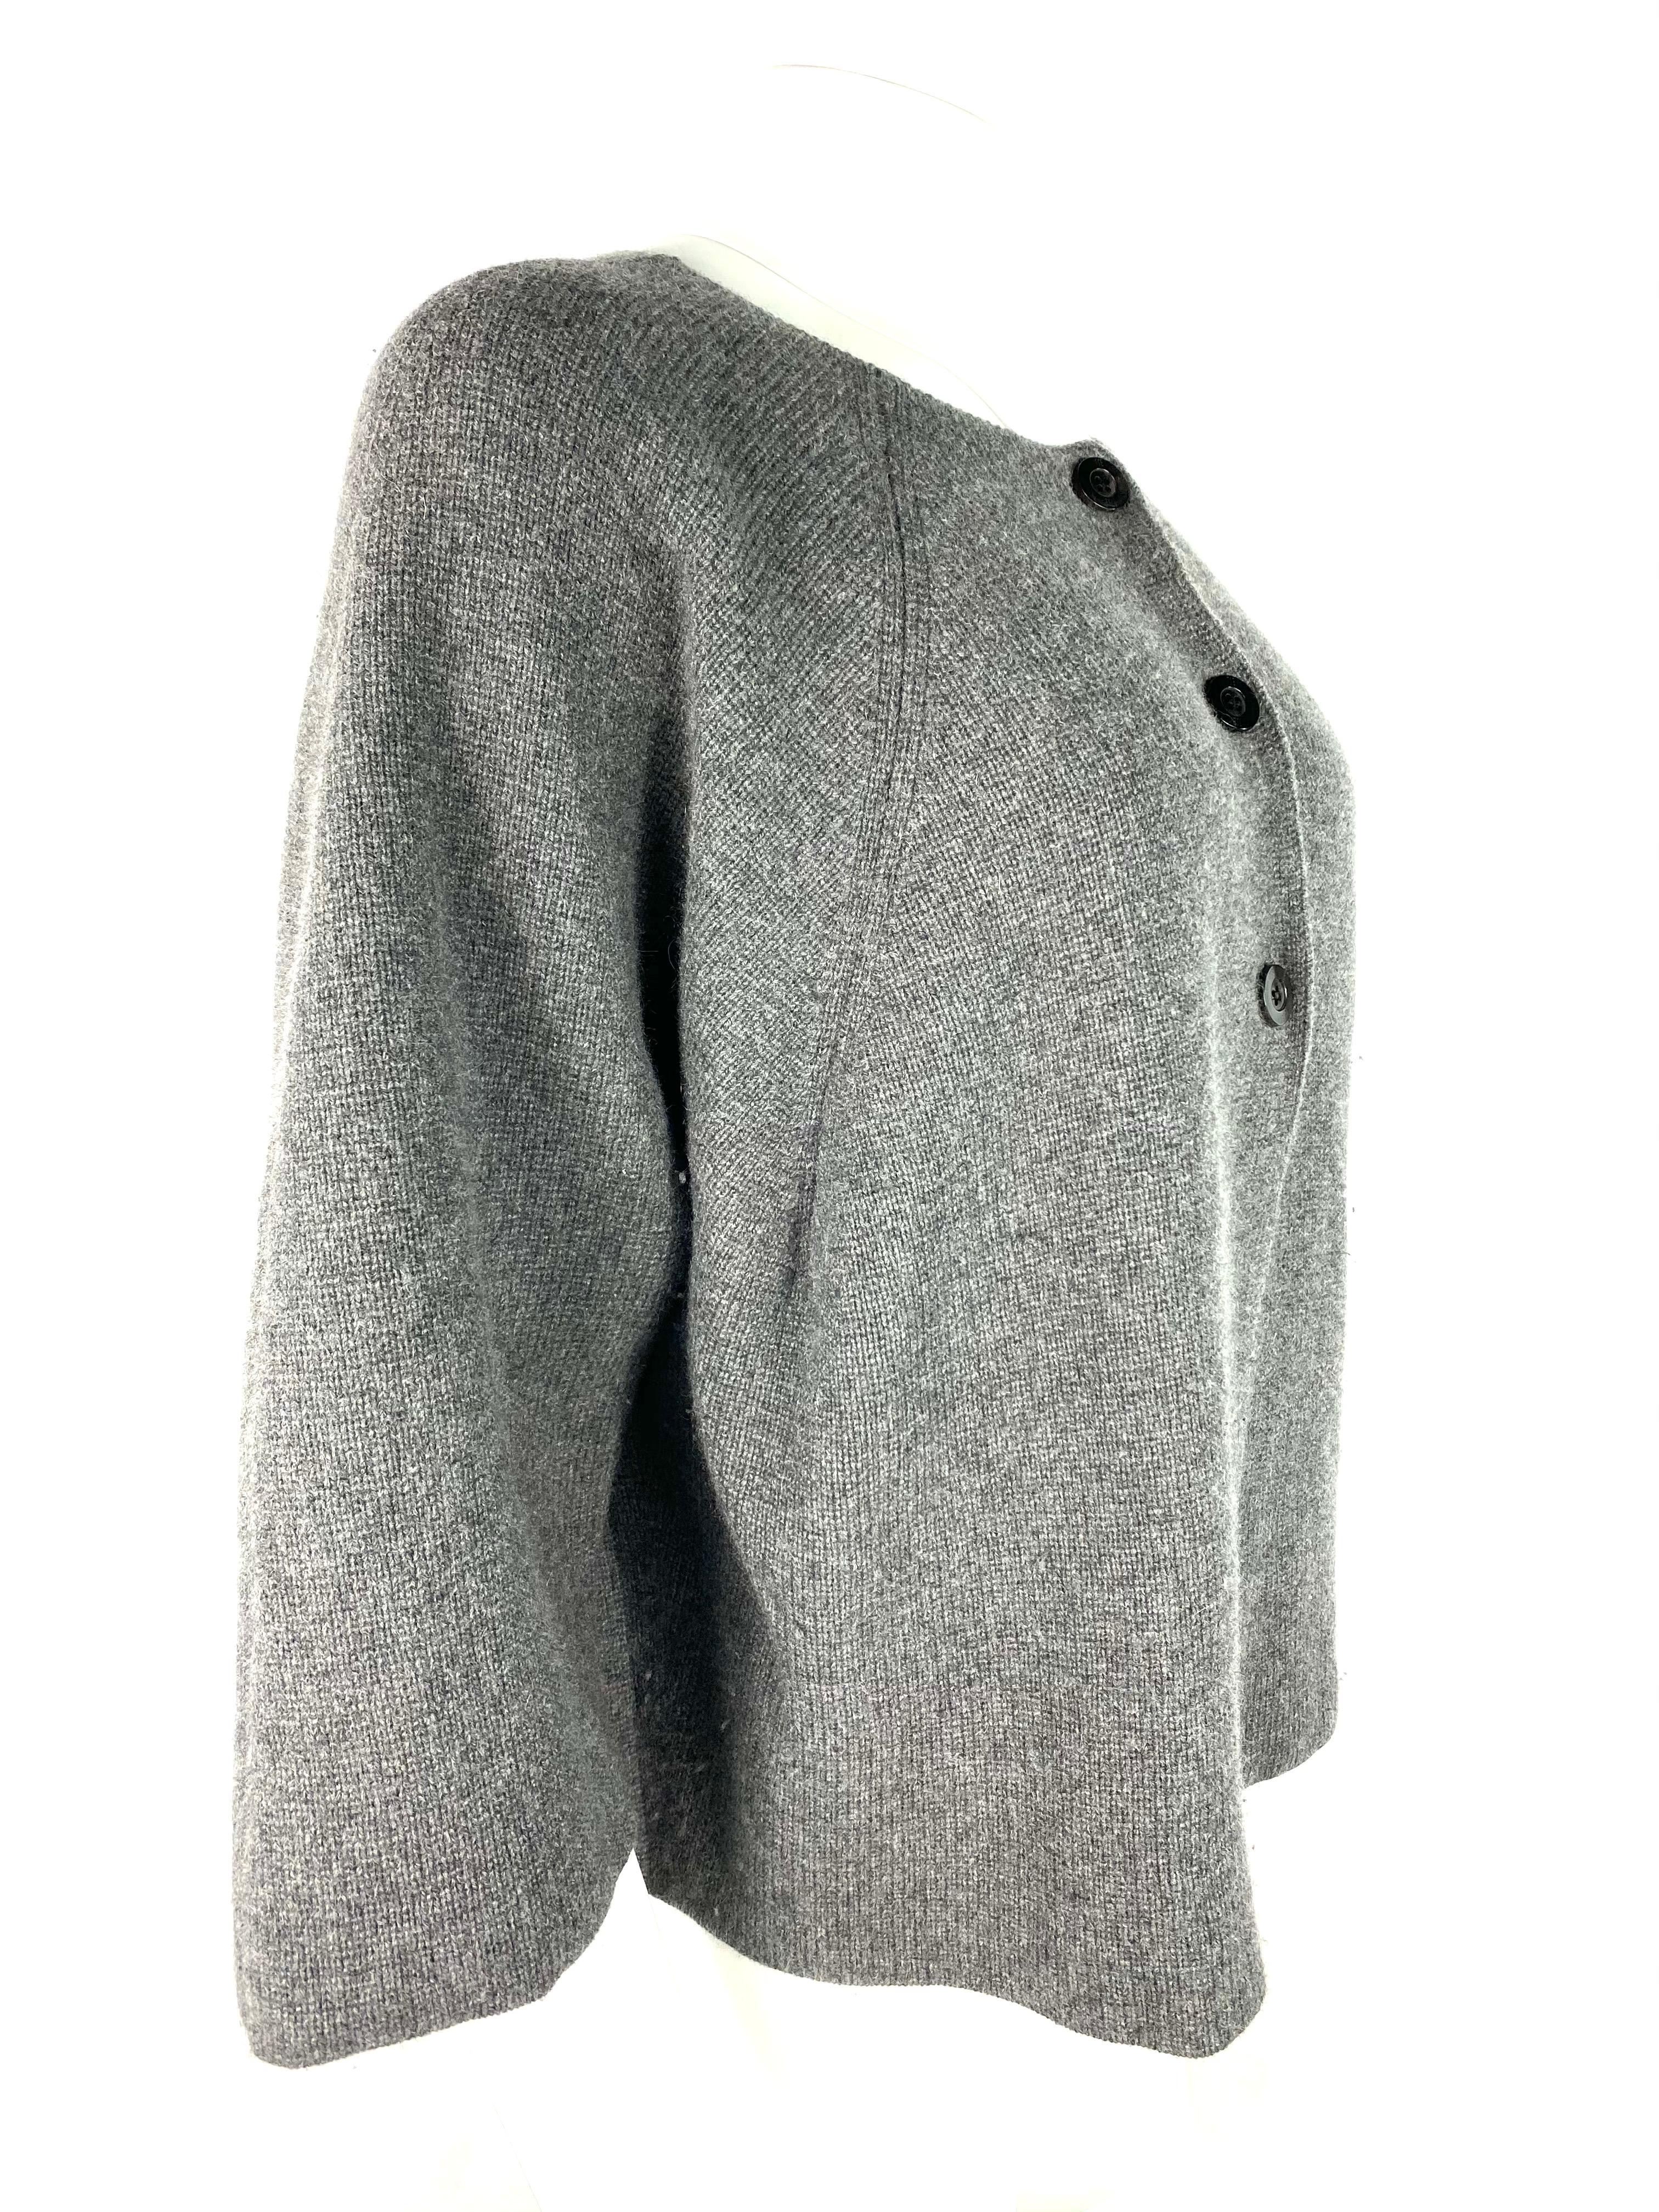 Gray TSE Grey Cashmere Sweater Cardigan Top, Size S/M For Sale